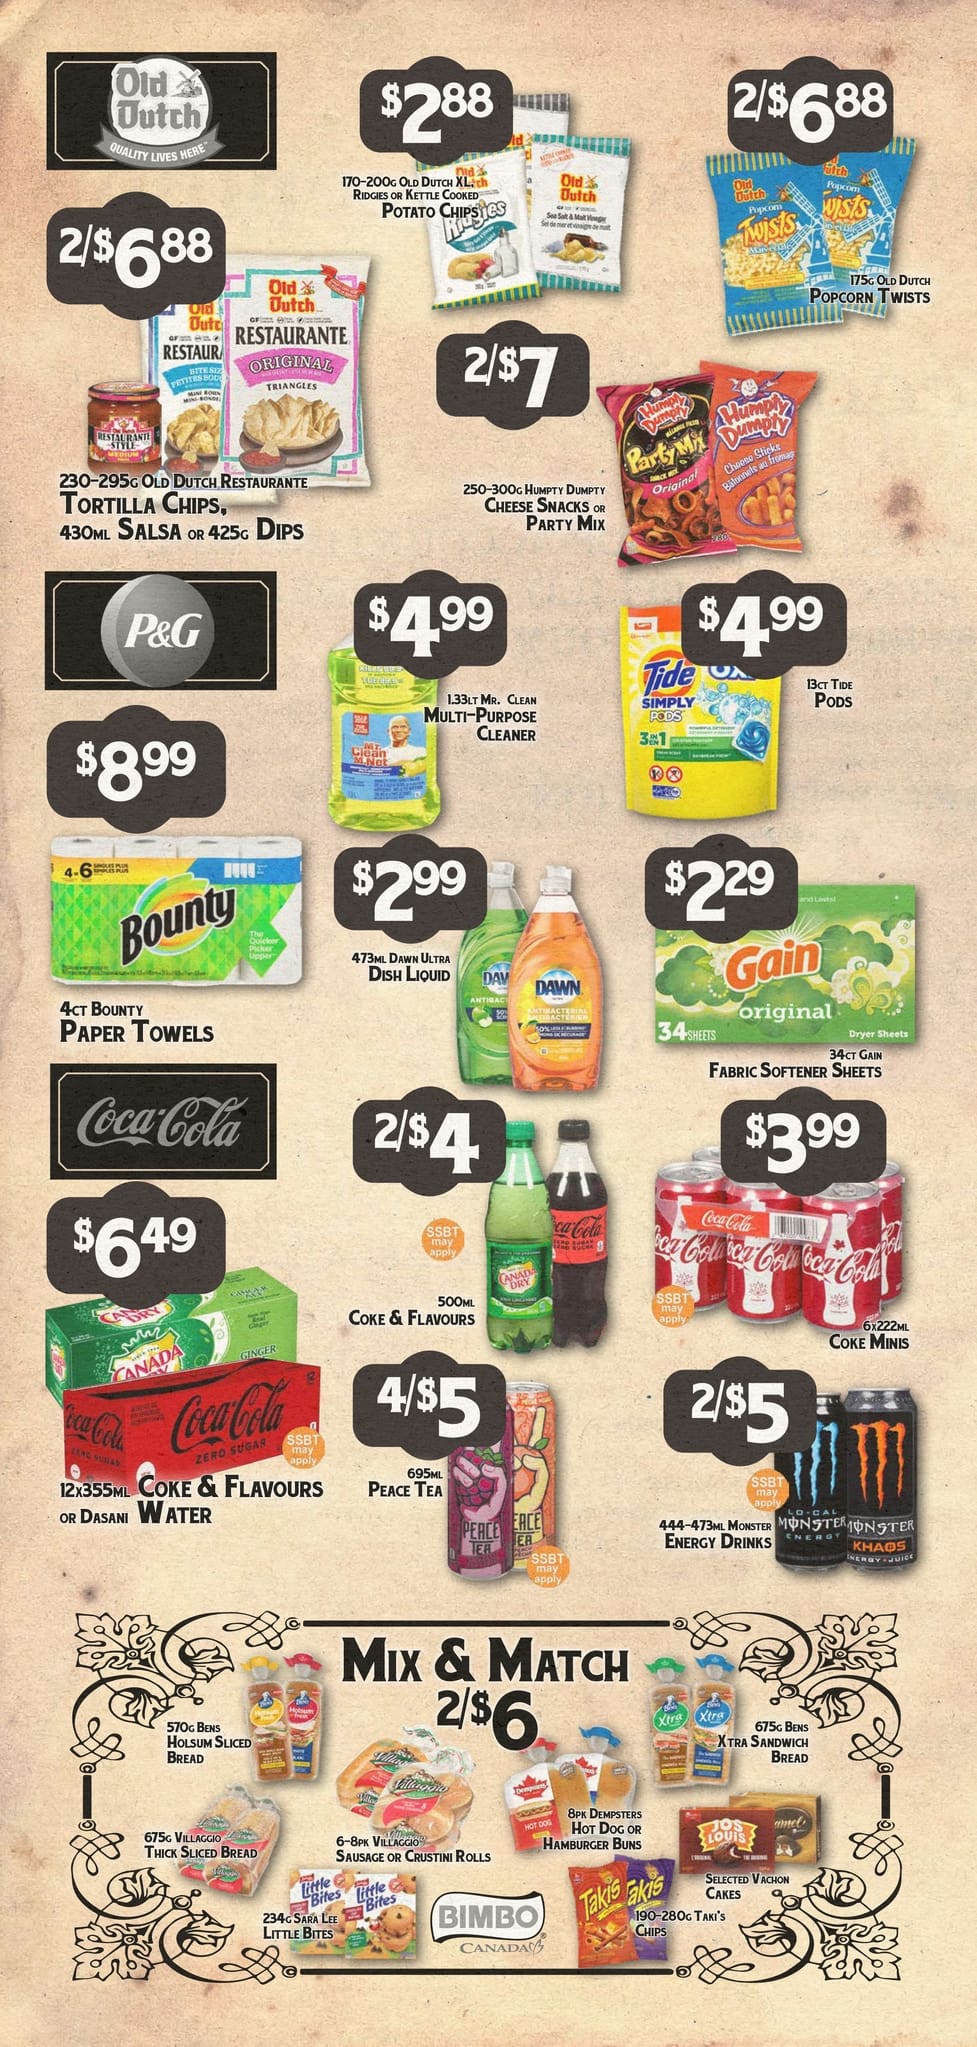 Powell's Supermarket - Weekly Flyer Specials - Page 4